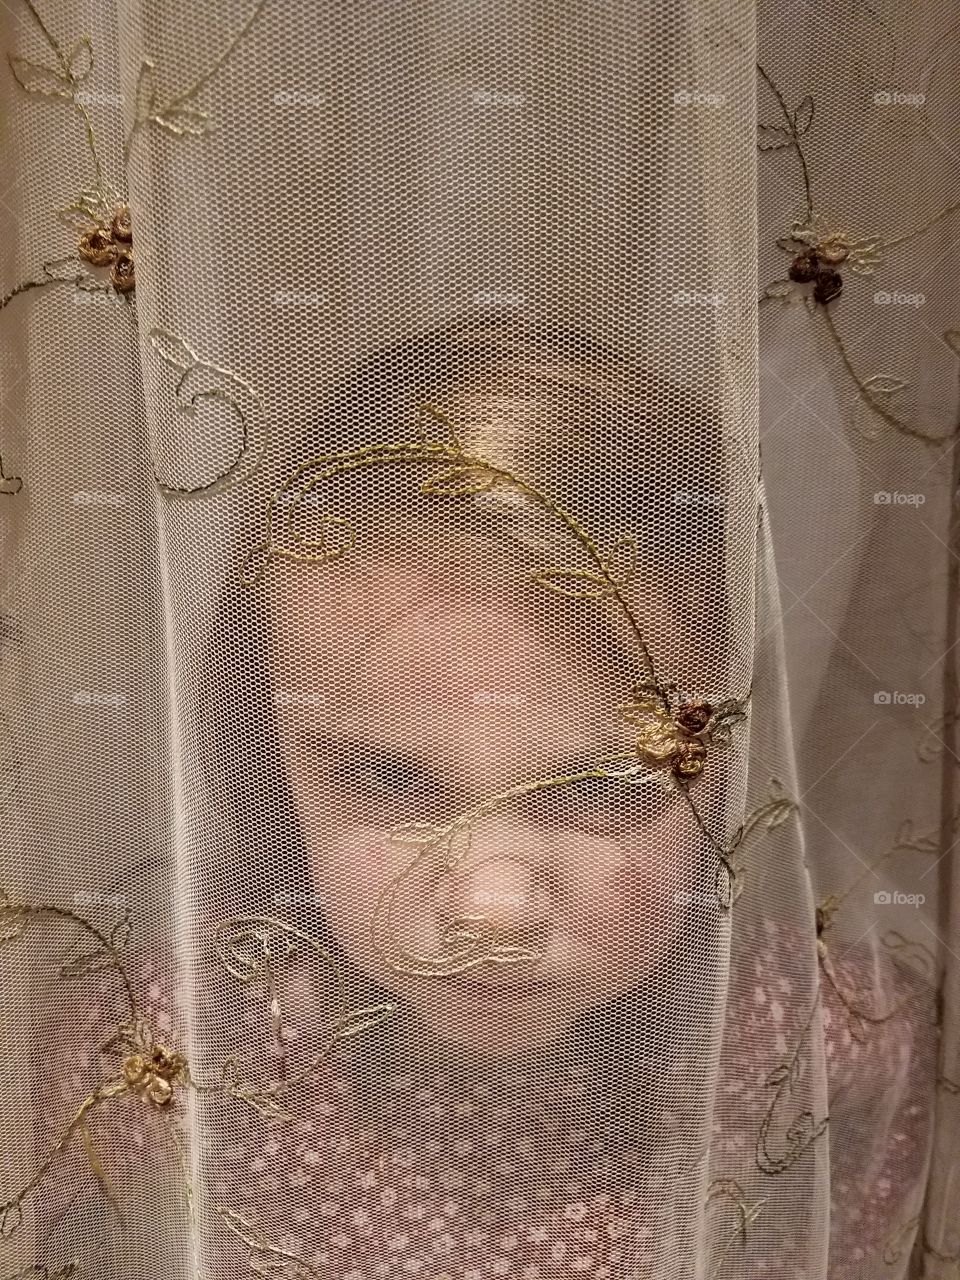 Angry girl behind curtain